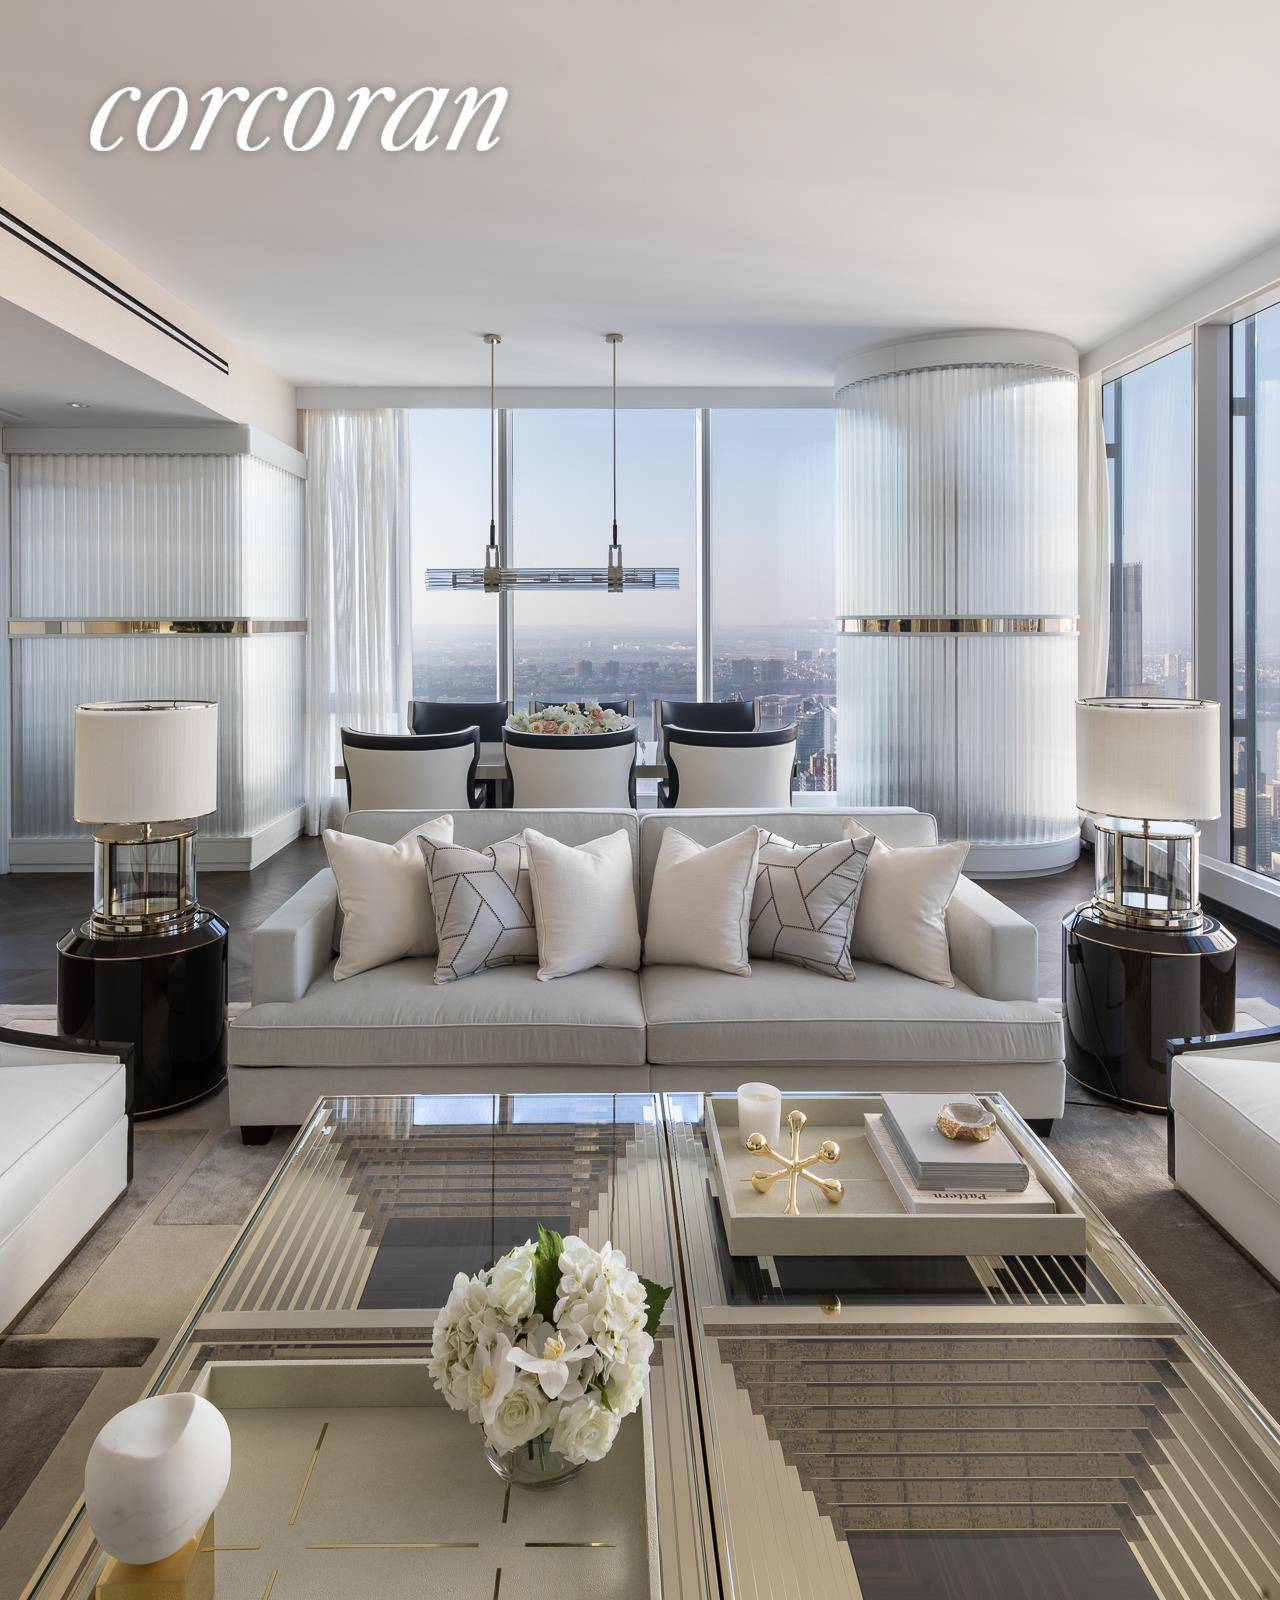 Reside over 650' above New York City in this half floor residence at Central Park Tower.